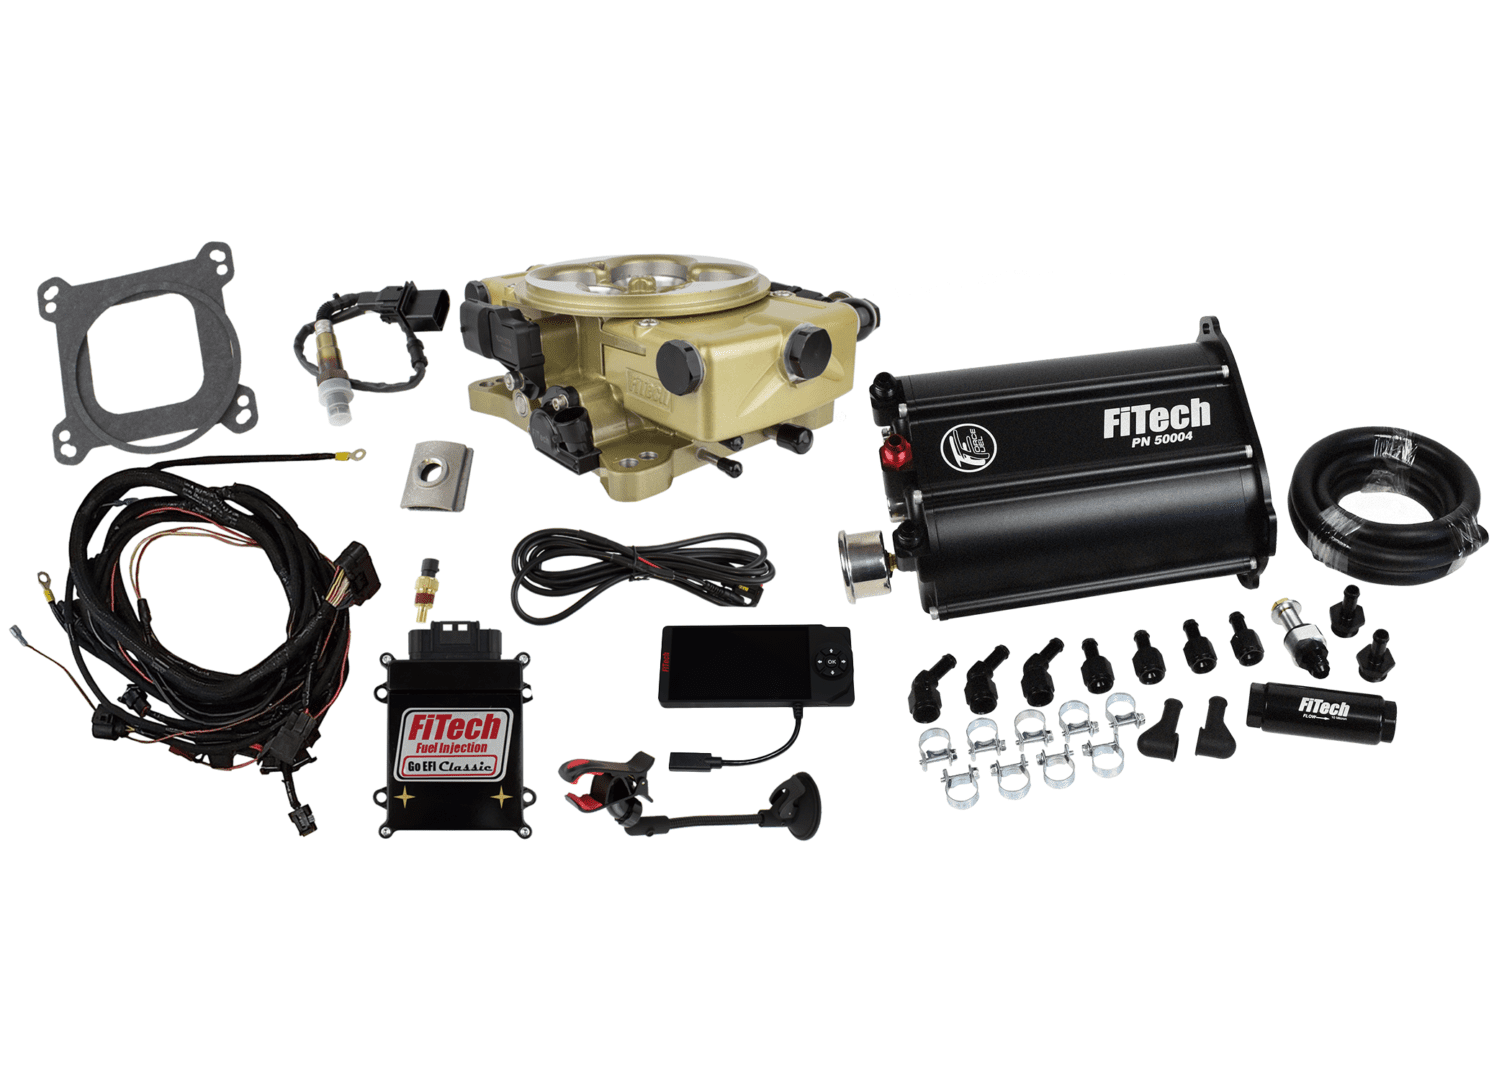 FiTech 35220 Go EFI Classic 650HP EFI Gold External ECU w/ Force Fuel, Fuel Delivery System